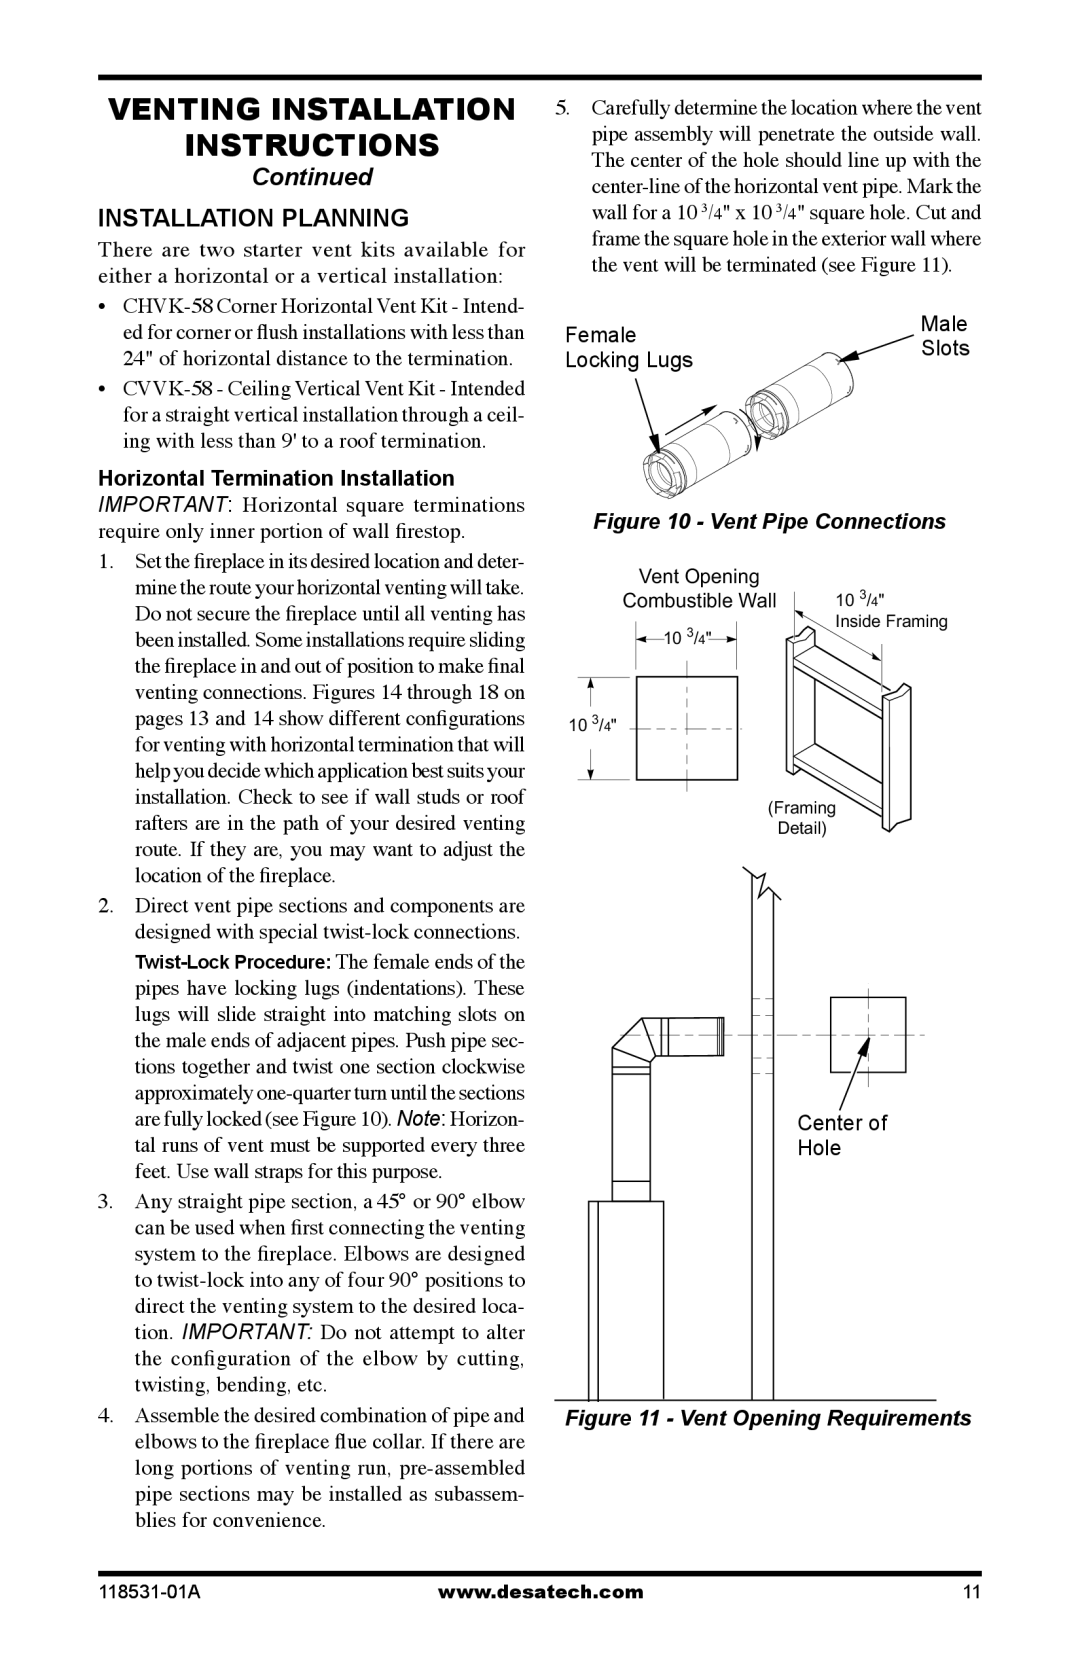 Desa CD36TN-M Venting Installation instructions, Continued, Installation Planning, Vent Pipe Connections 